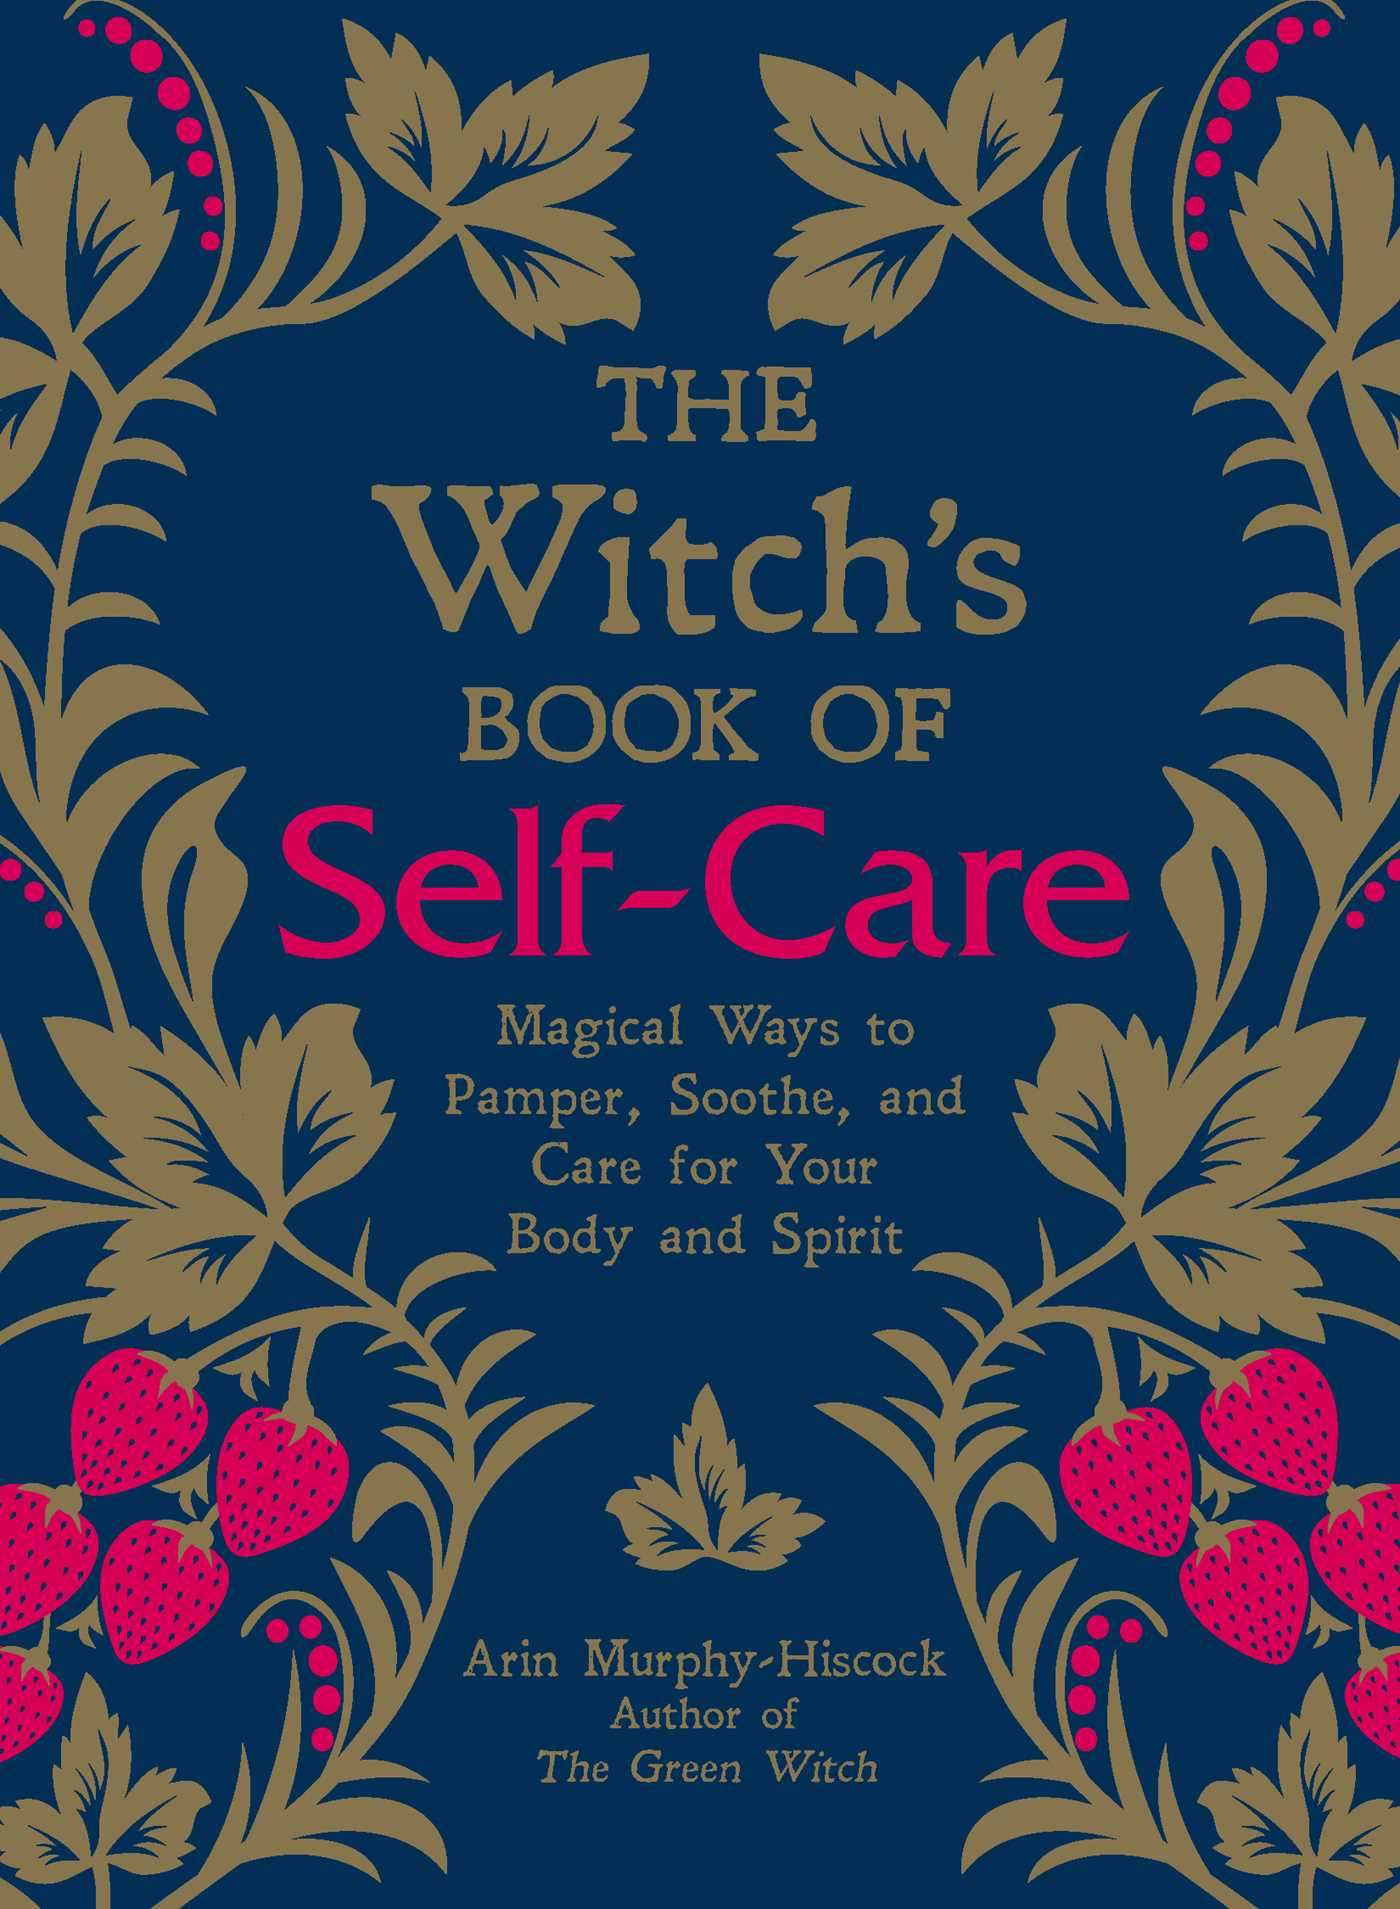 The Witch's Book of Self-Care : Magical Ways to Pamper, Soothe, and Care for Your Body and Spirit